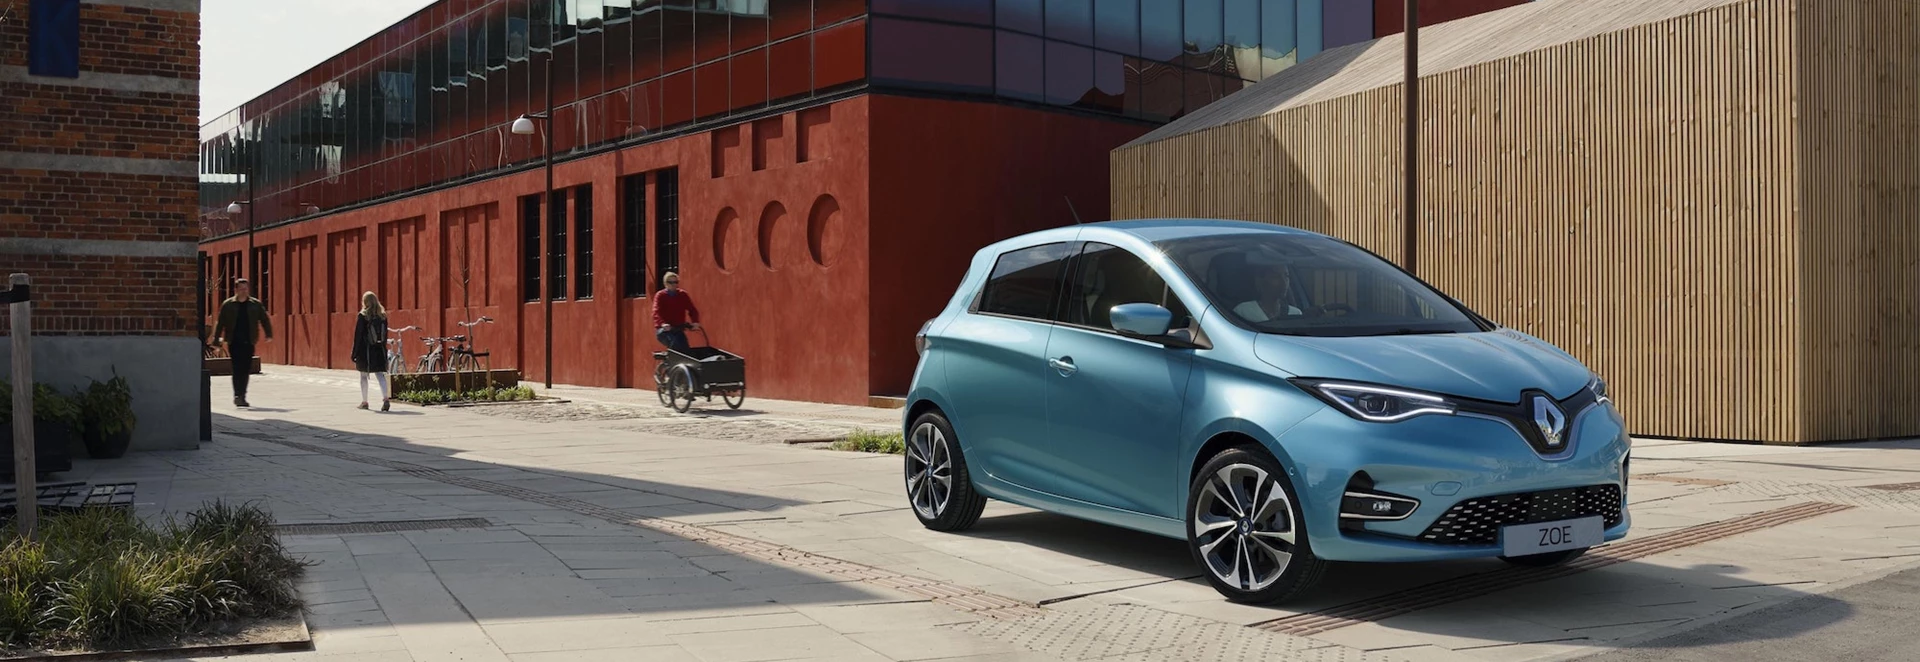 Can the 2019 Renault Zoe storm the EV market?